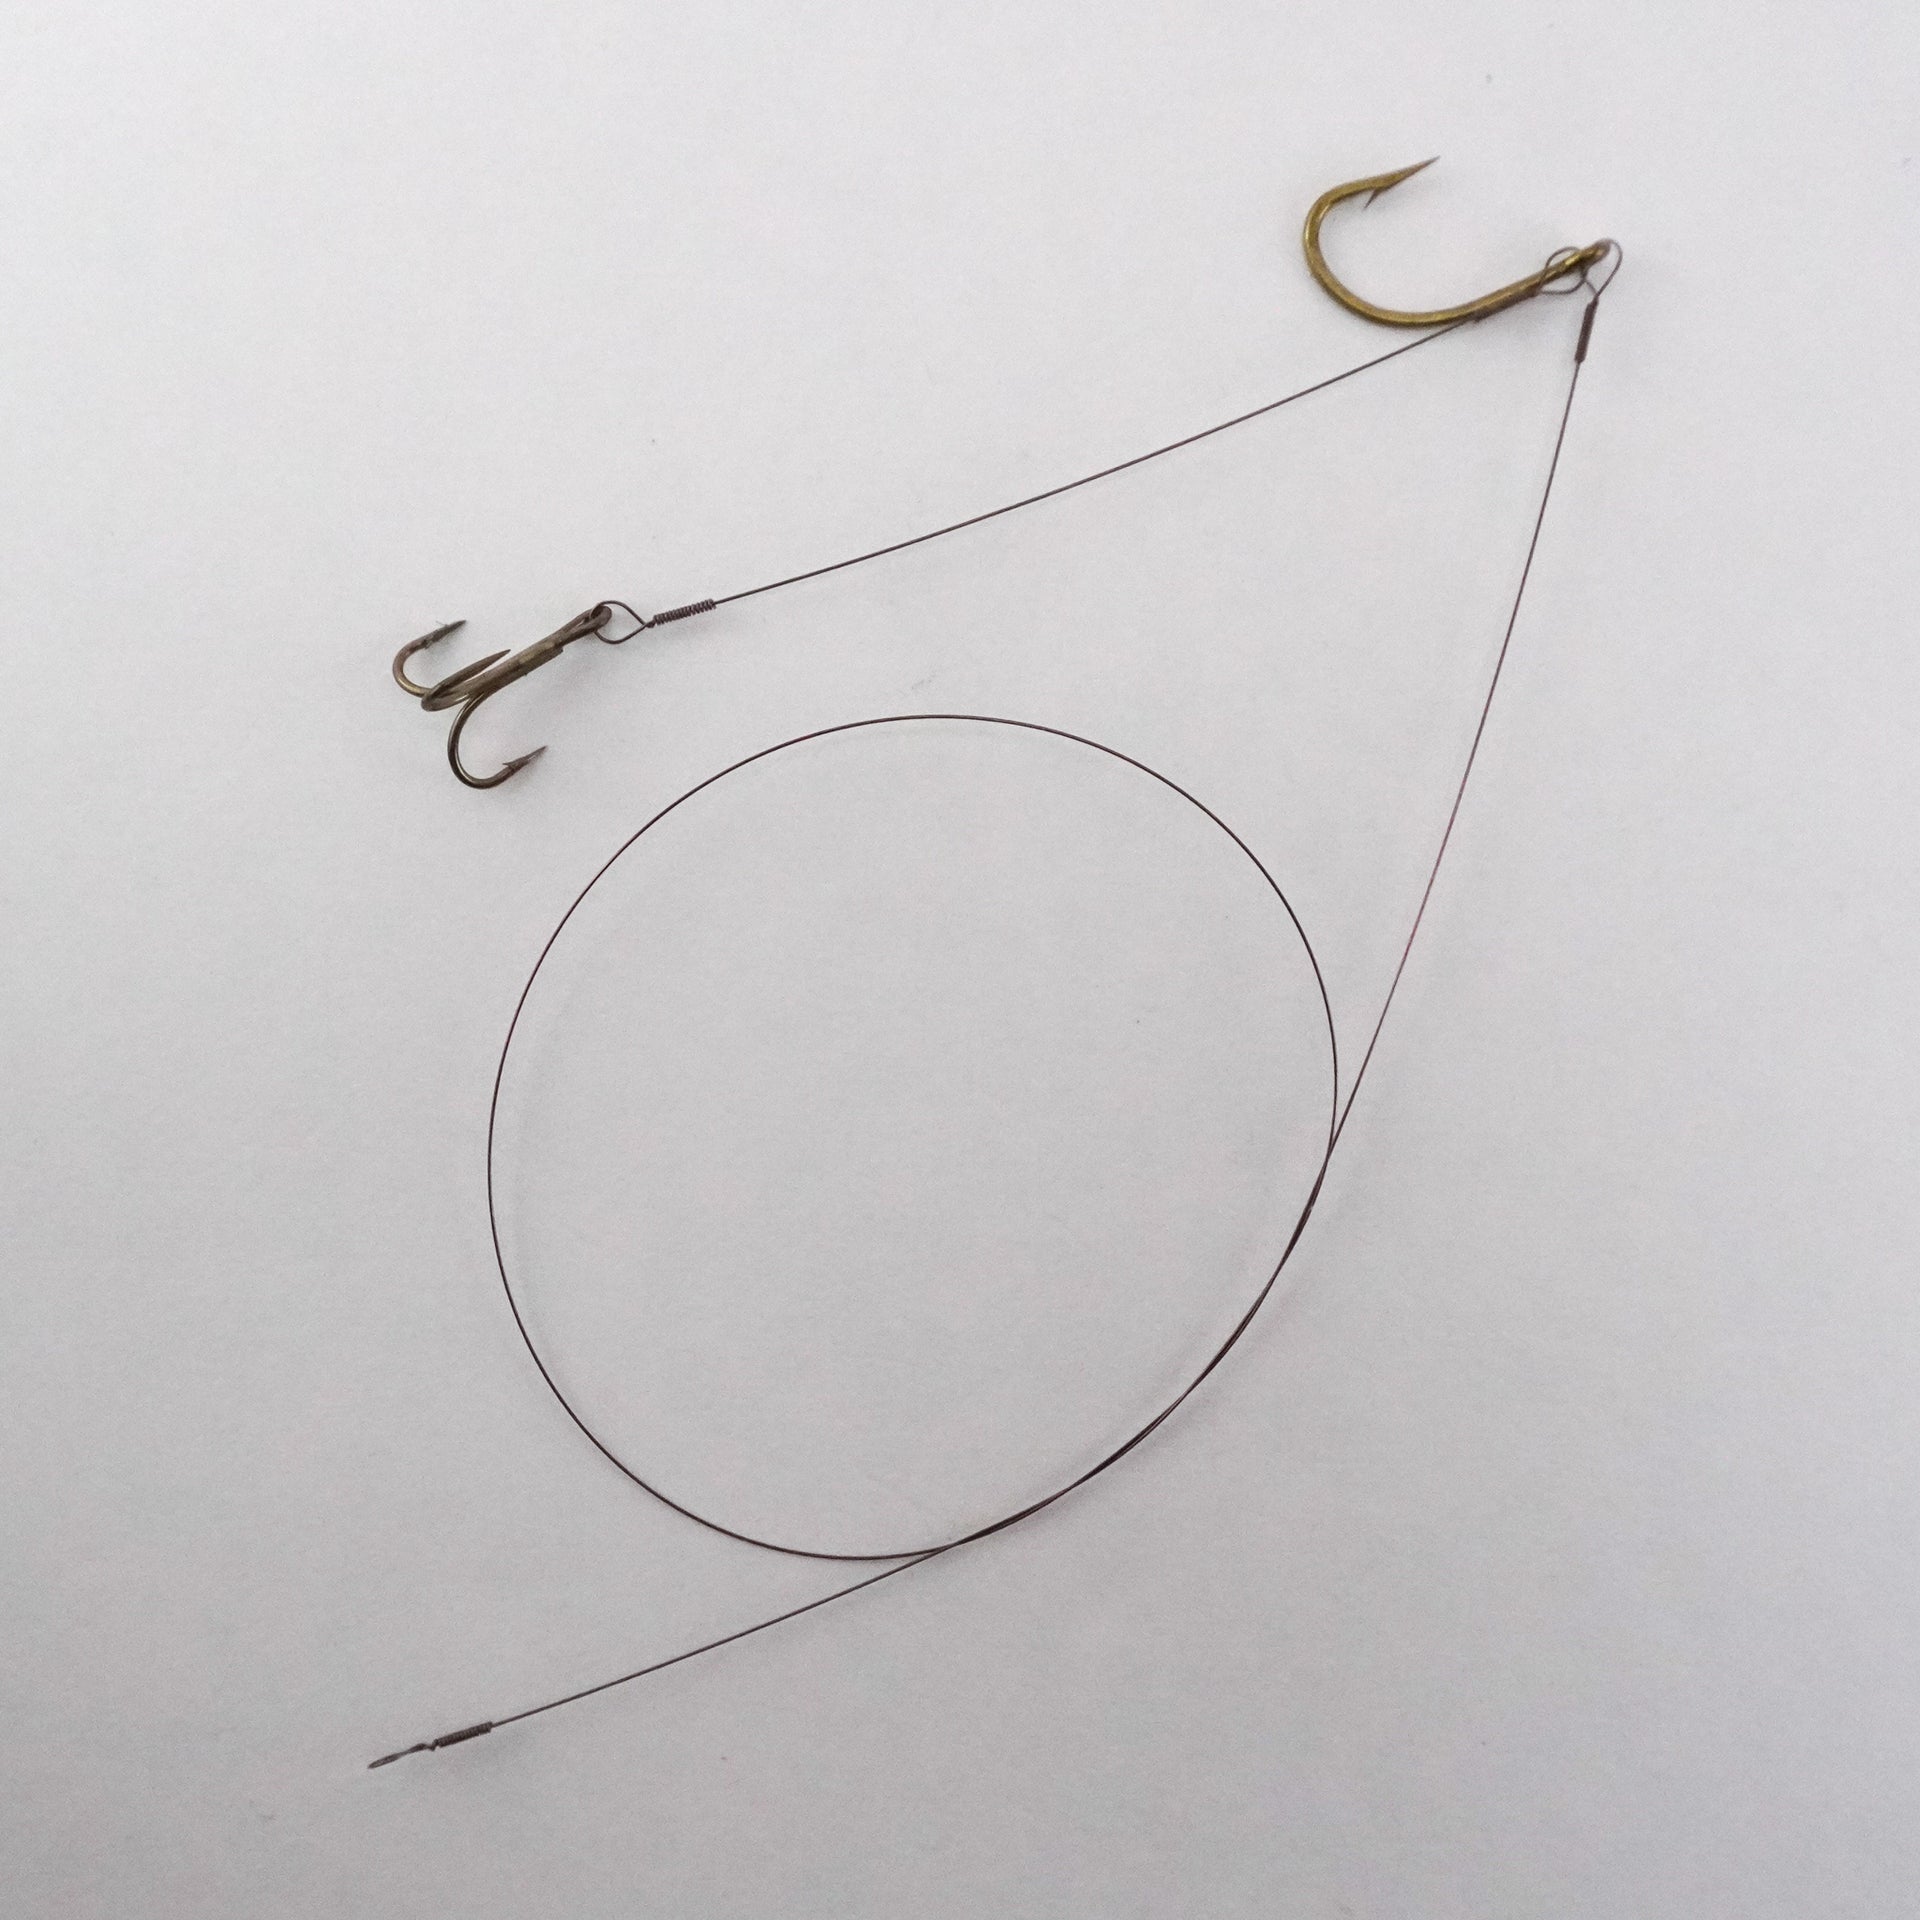 Stinger Hook Fishing Rig - A Fishing Rig for Big Bait - Using Multiple Hook  Rigs for Big Fish 